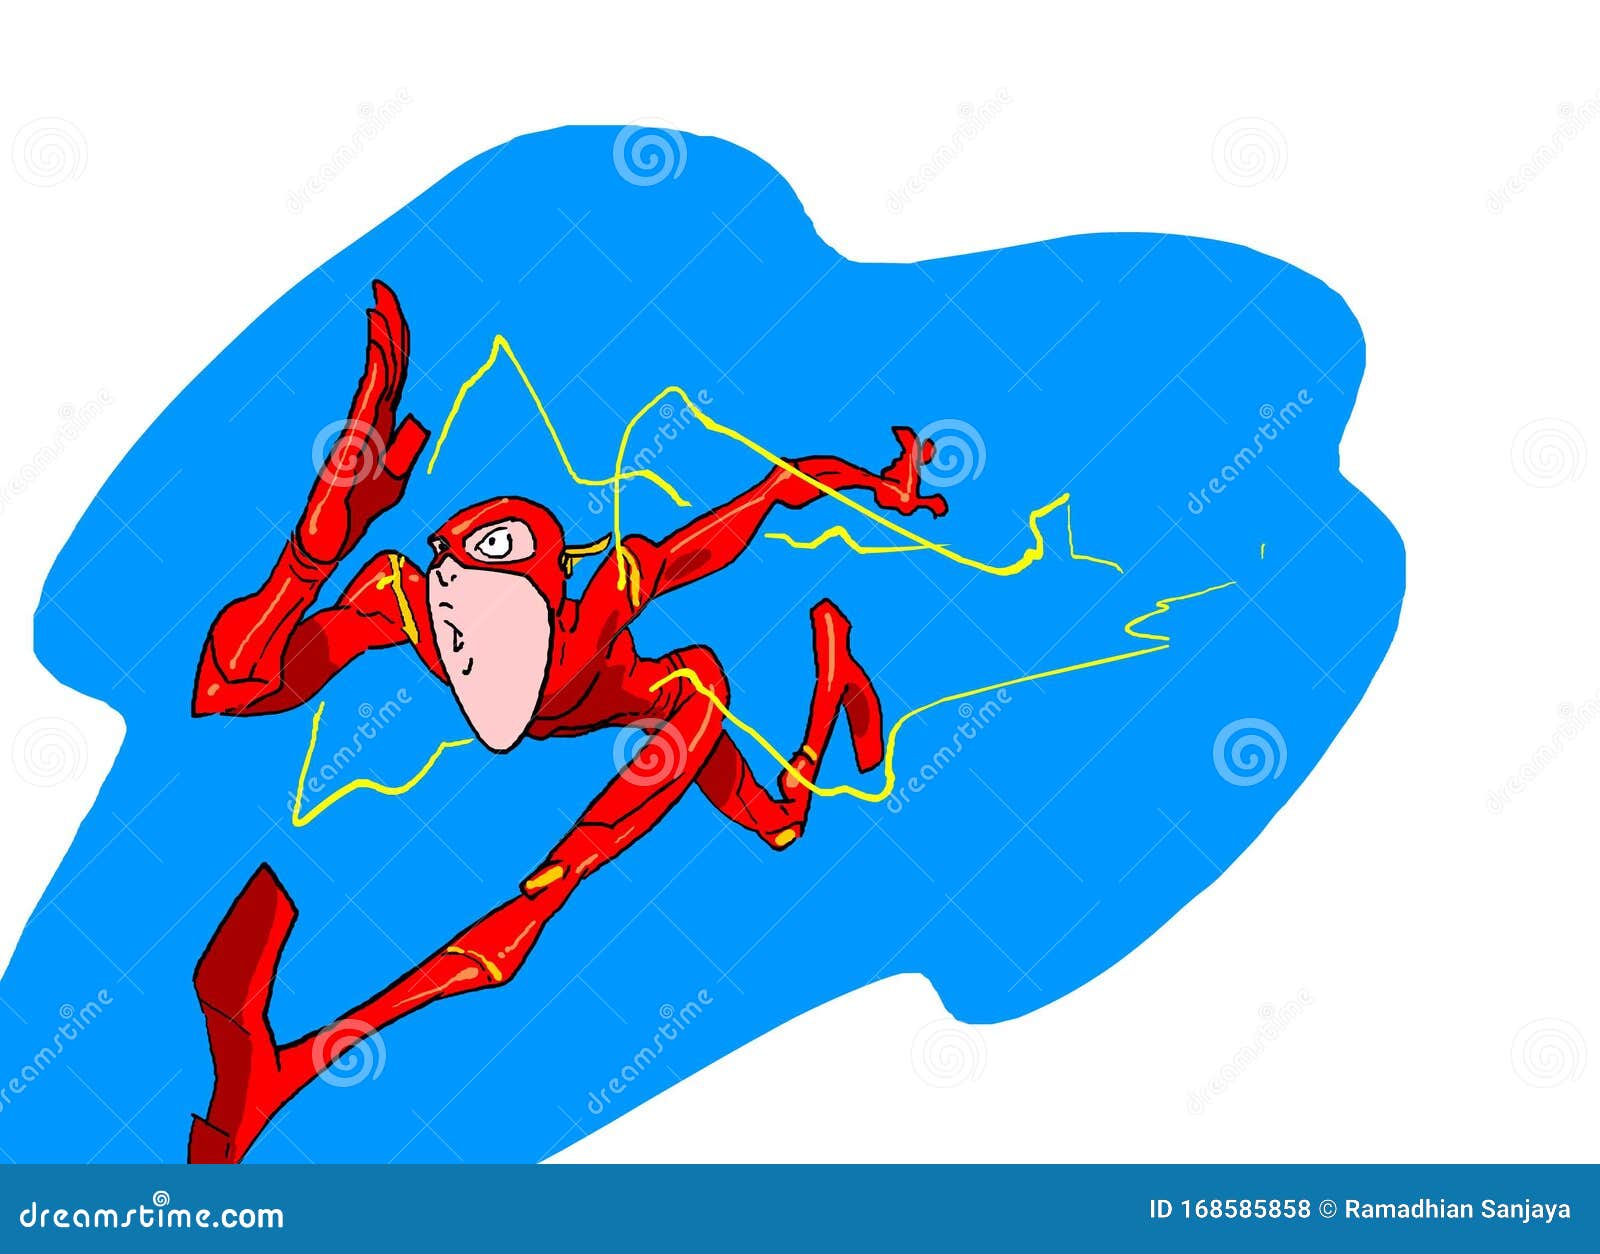 The Flash Running PNG by superflashofficial on DeviantArt